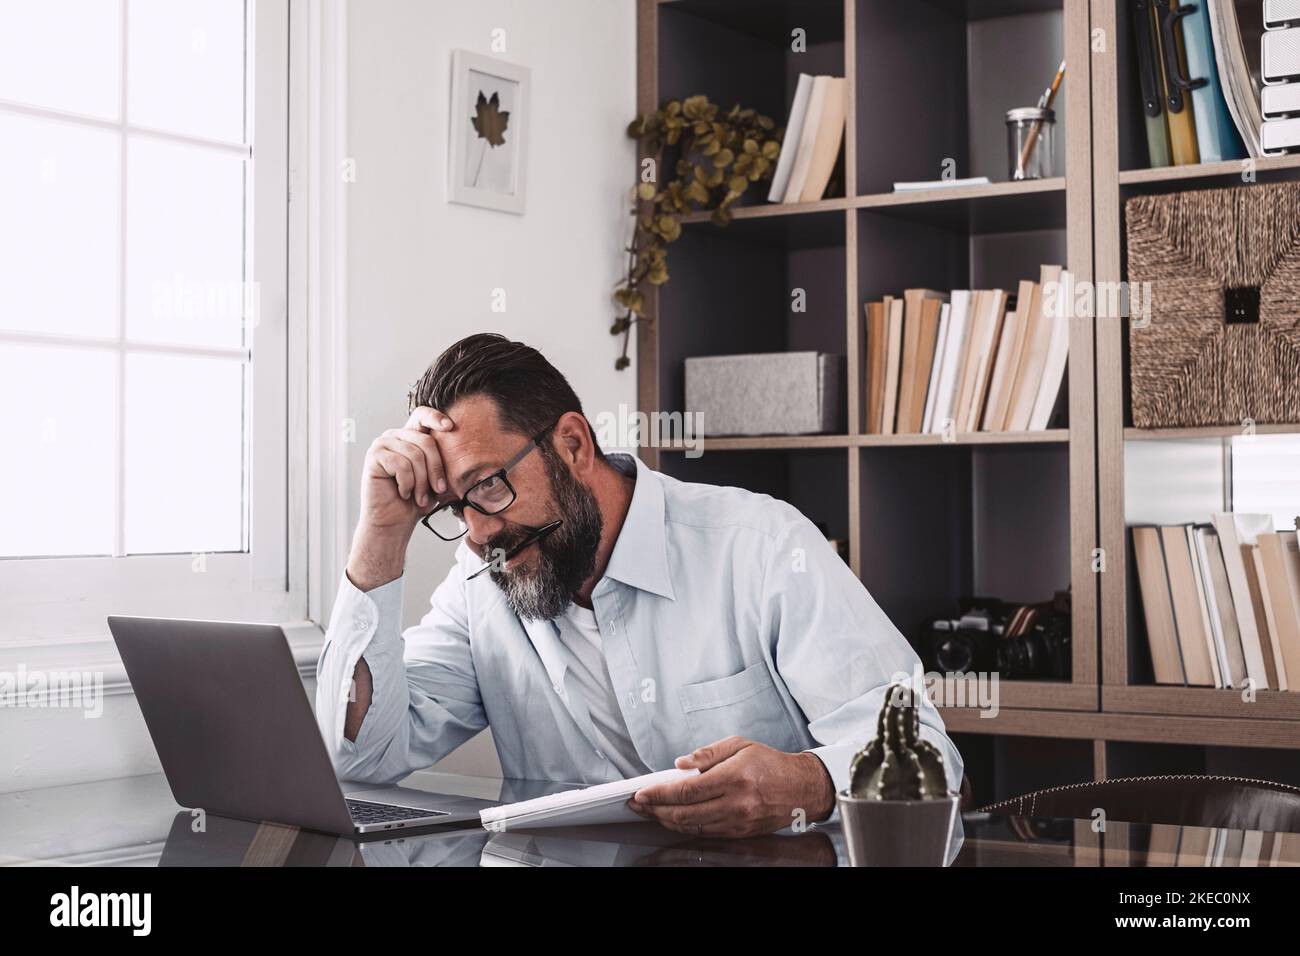 Unhealthy old stressed businessman looking at laptop, using computer, suffering from work too much or long computer overwork. Stock Photo